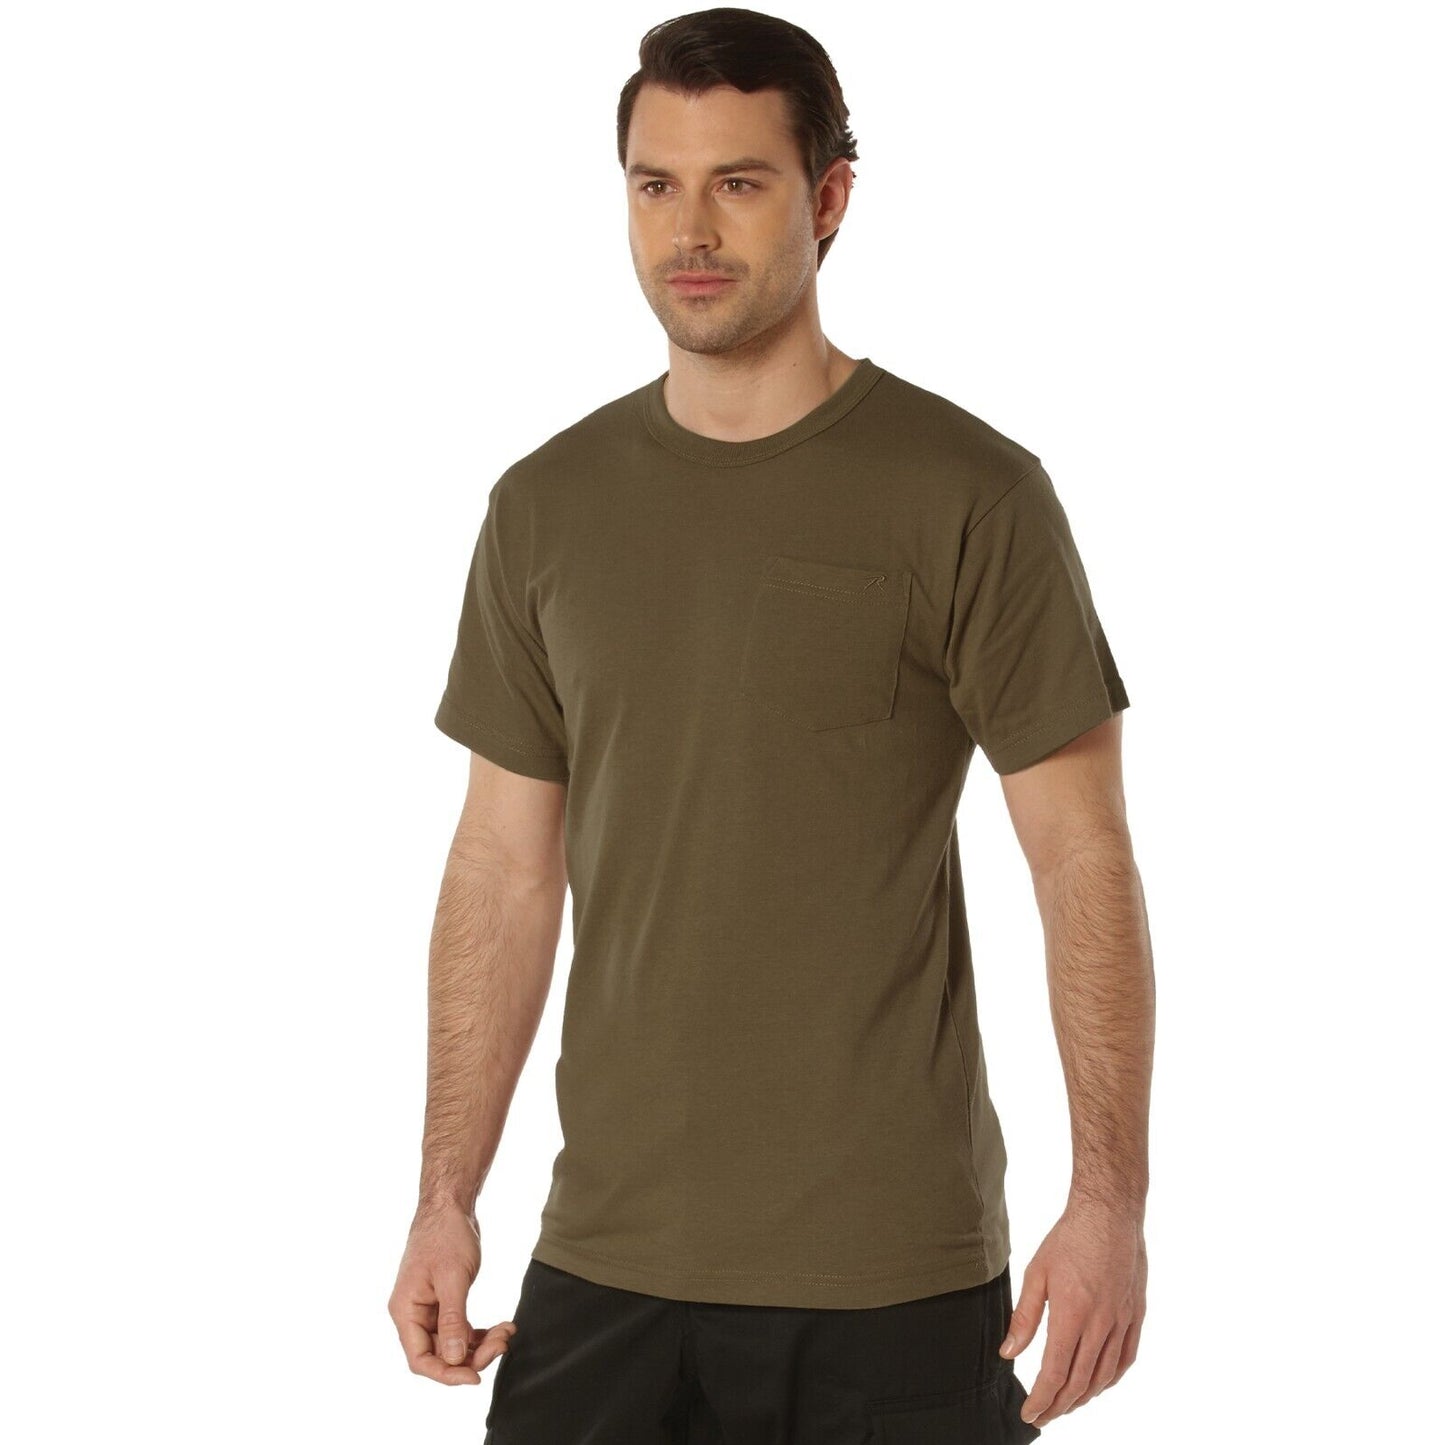 Rothco Men's Moisture Wicking T-Shirt 100% Polyester Tee with Pocket